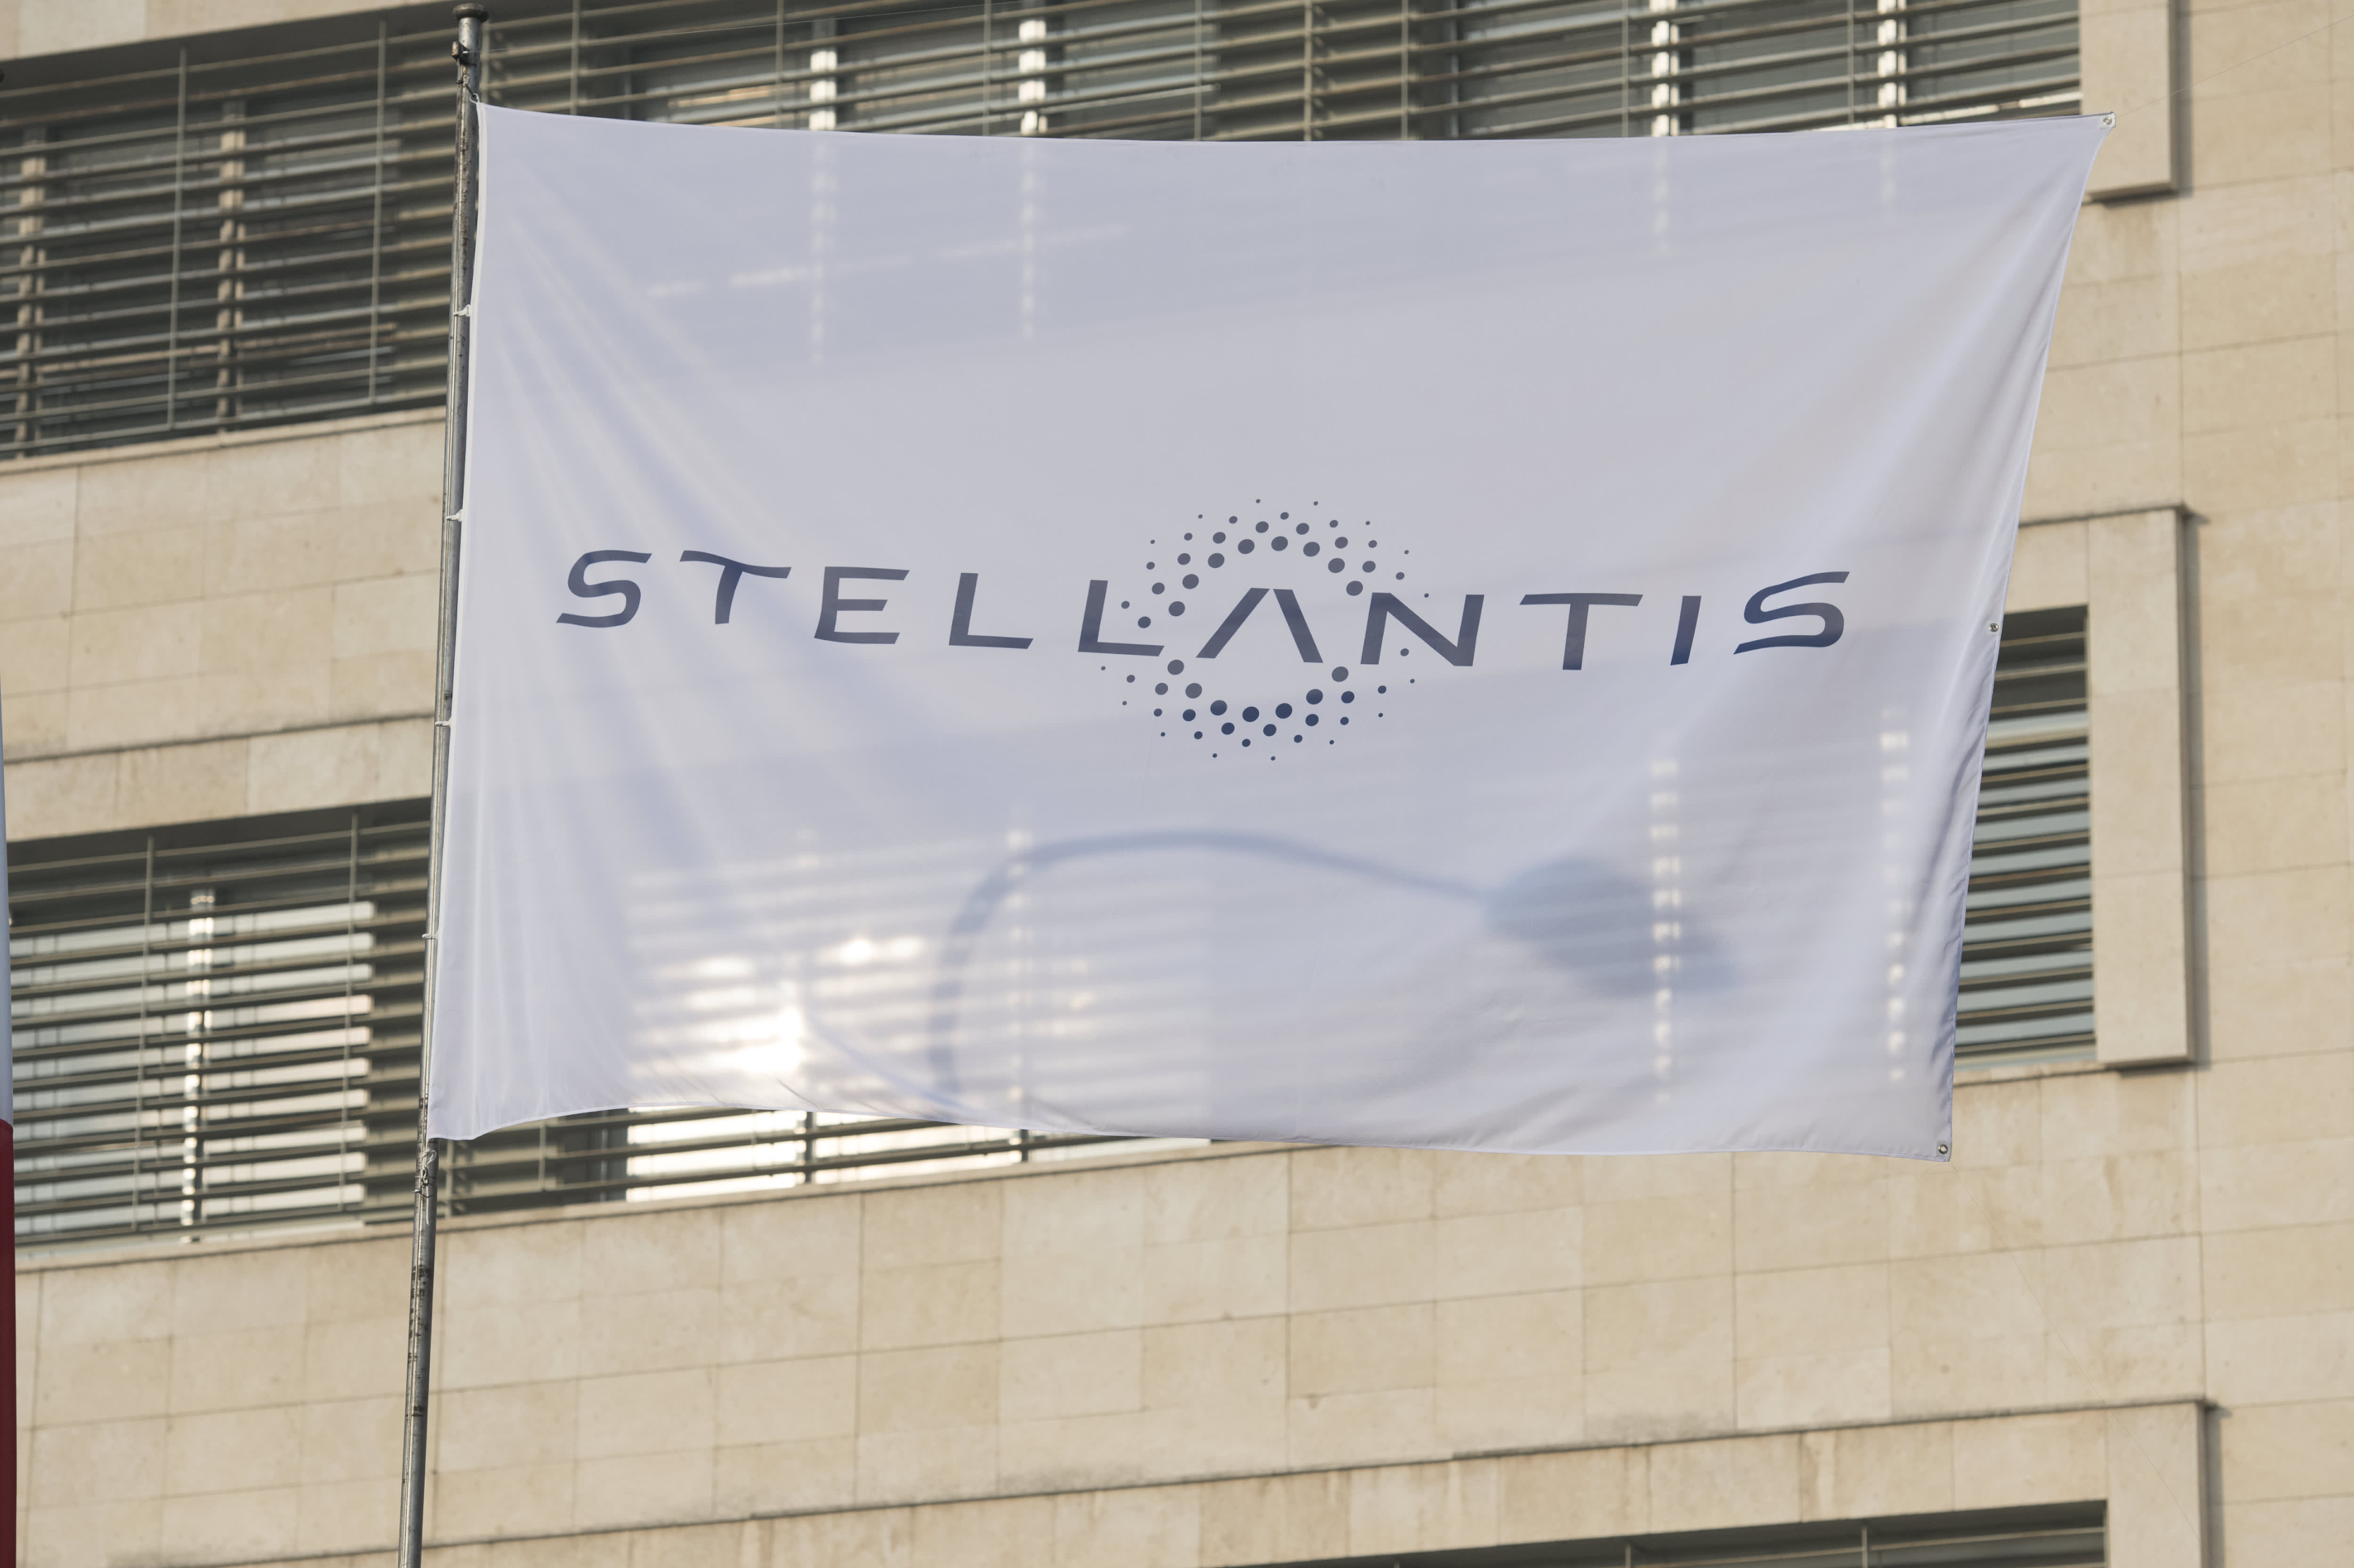 What to know about Stellantis as it debuts on the NYSE